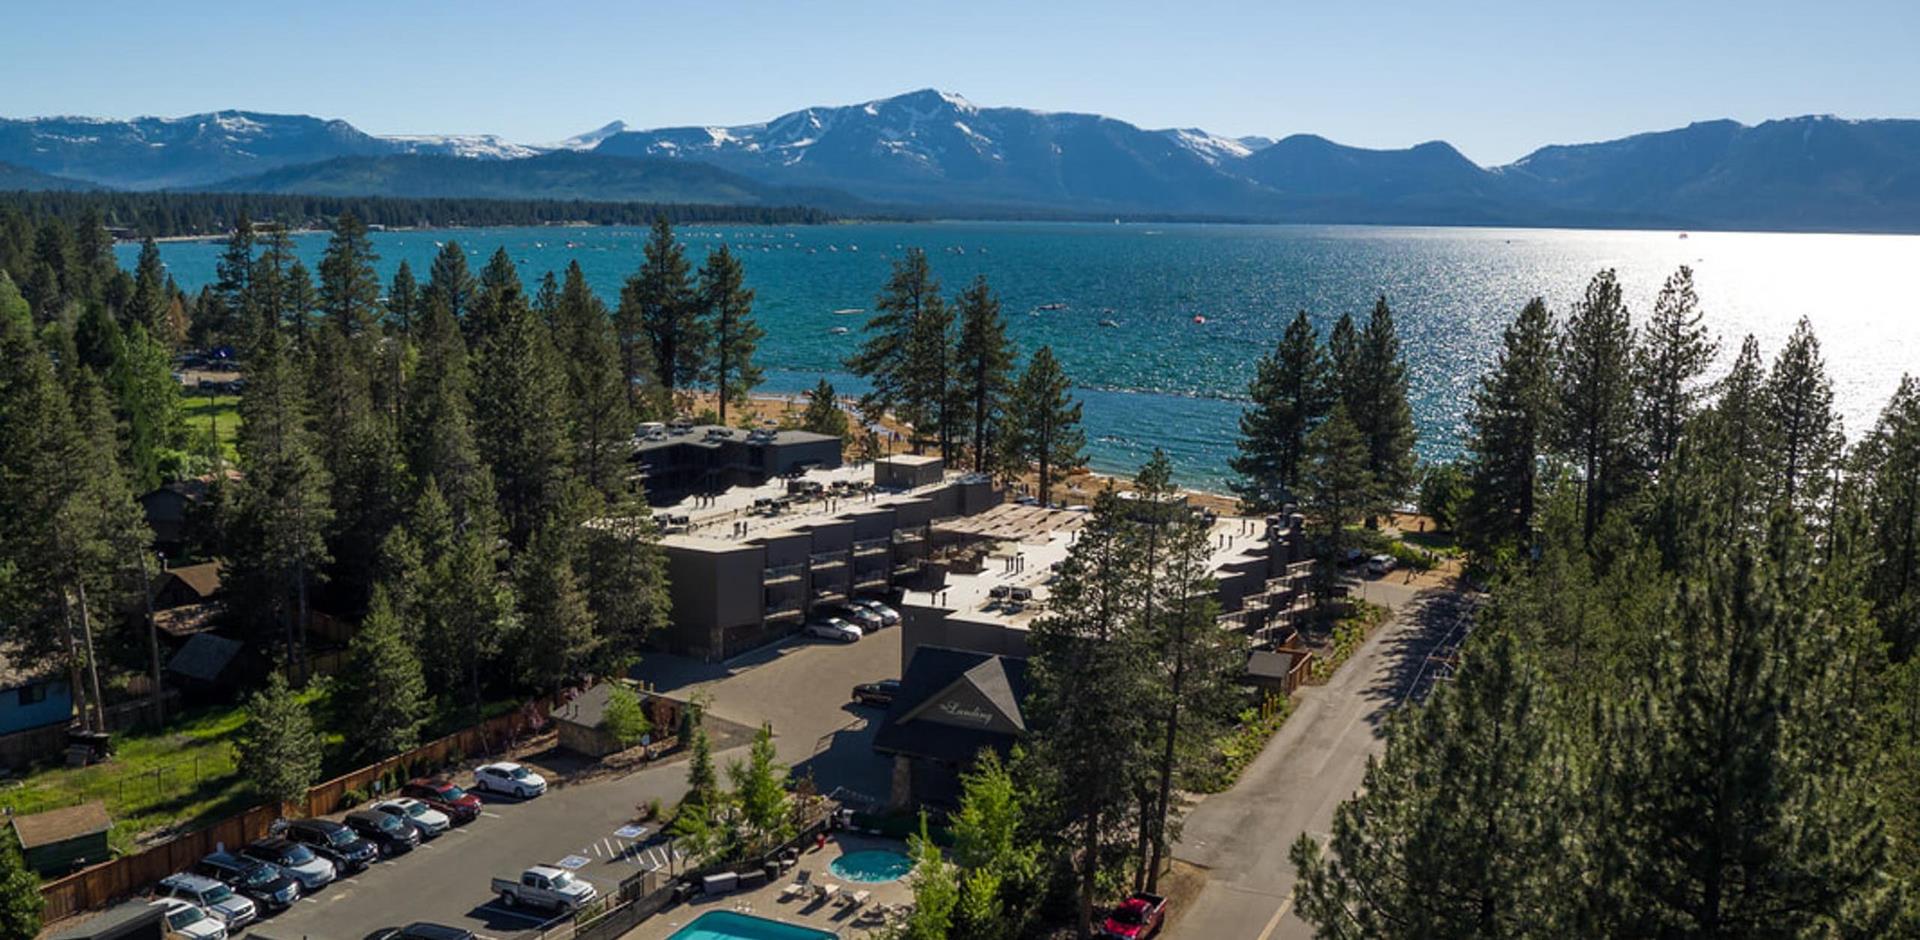 The Landing Tahoe Resort and Spa, USA, A&K